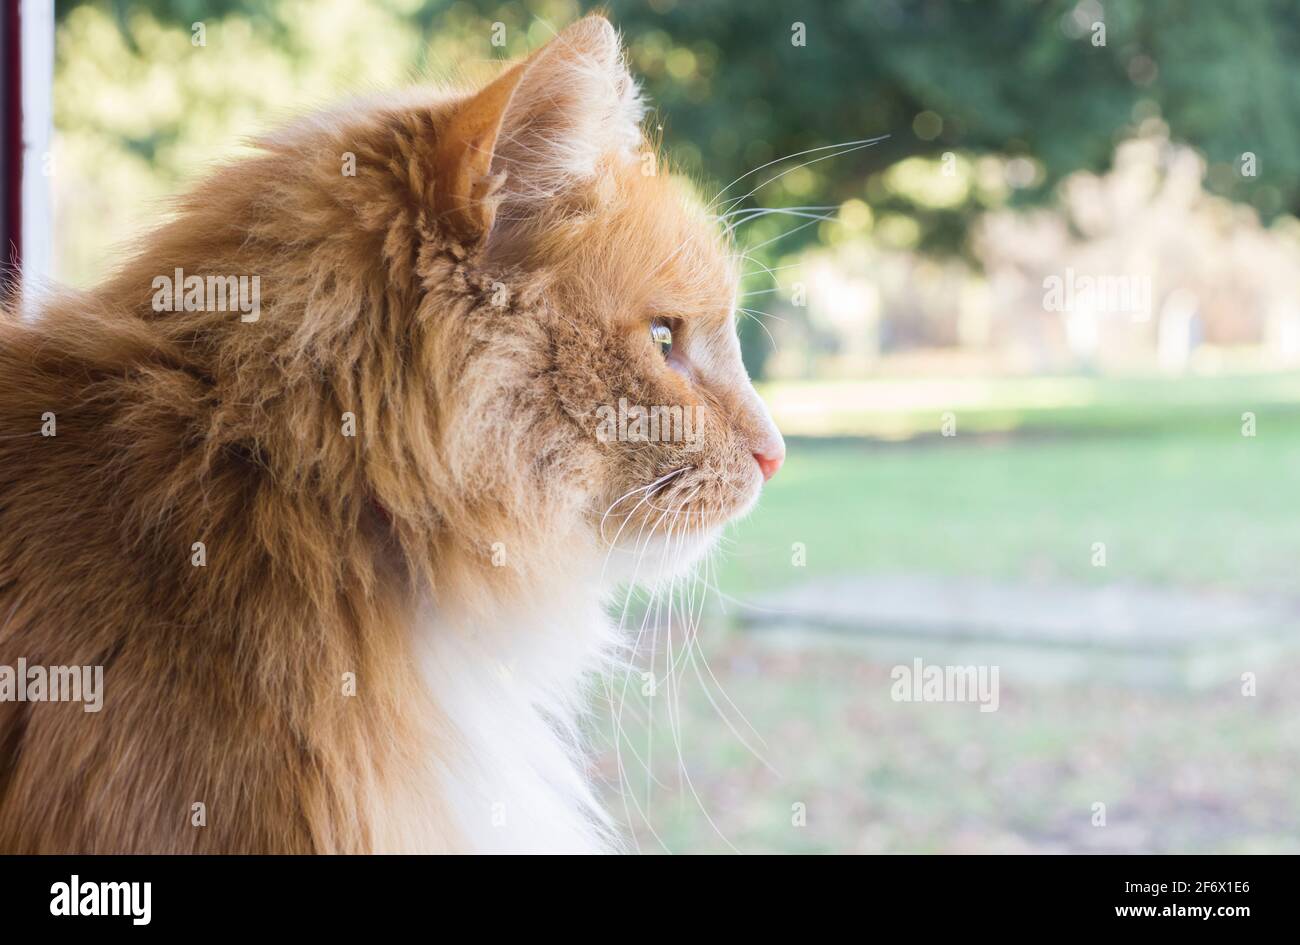 A side view / profile of a ginger cat looking out of a window towards a churchyard. UK Stock Photo